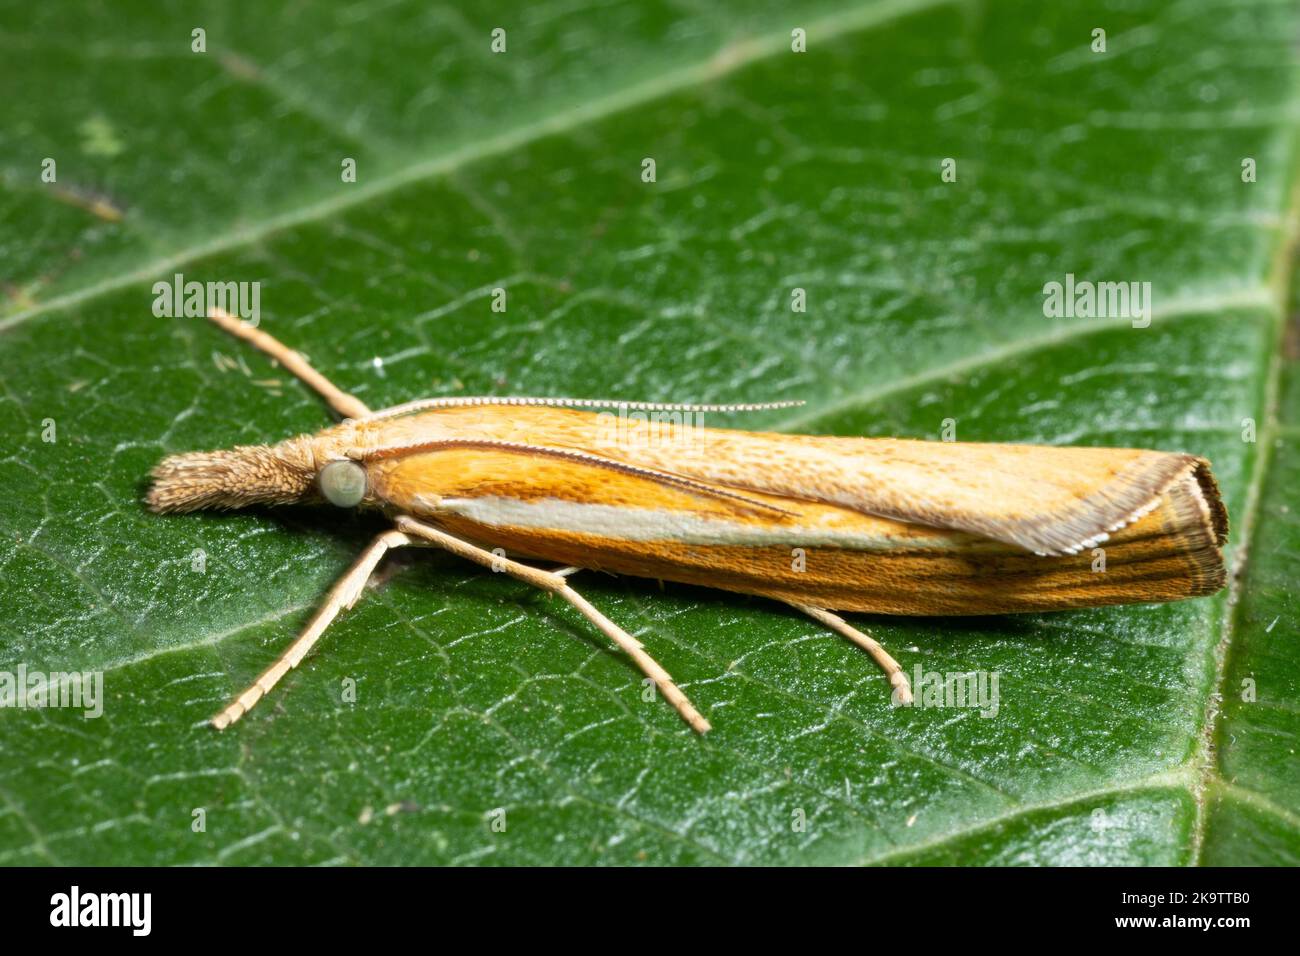 Striped grass borer butterfly with closed wings sitting on green leaf looking left Stock Photo